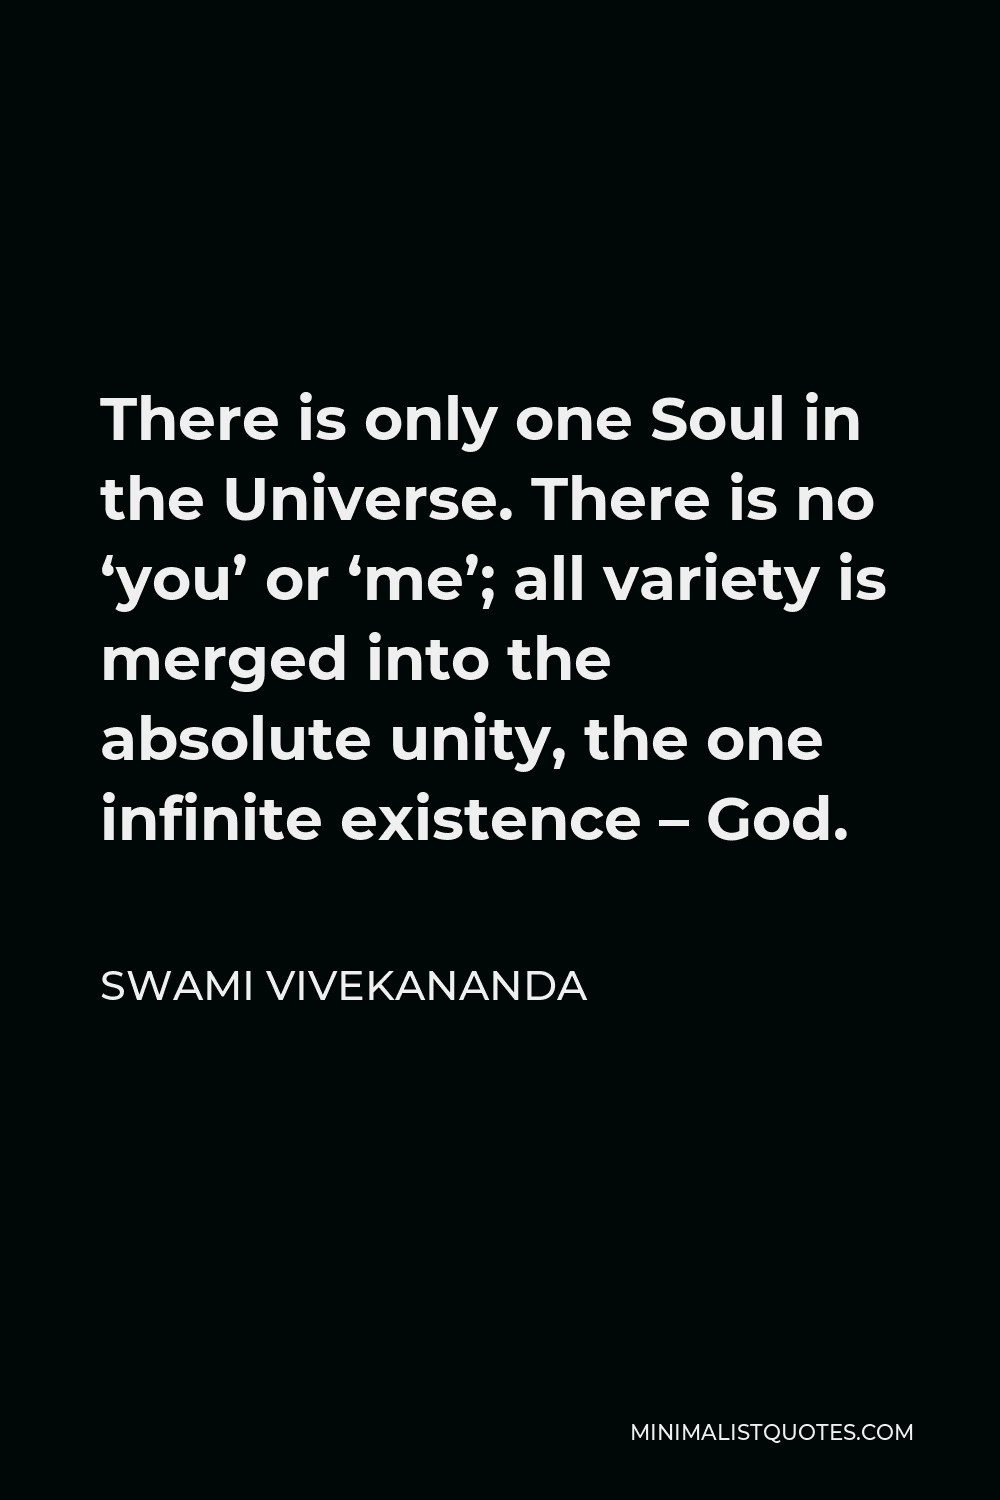 Swami Vivekananda Quote - There is only one Soul in the Universe. There is no ‘you’ or ‘me’; all variety is merged into the absolute unity, the one infinite existence – God.